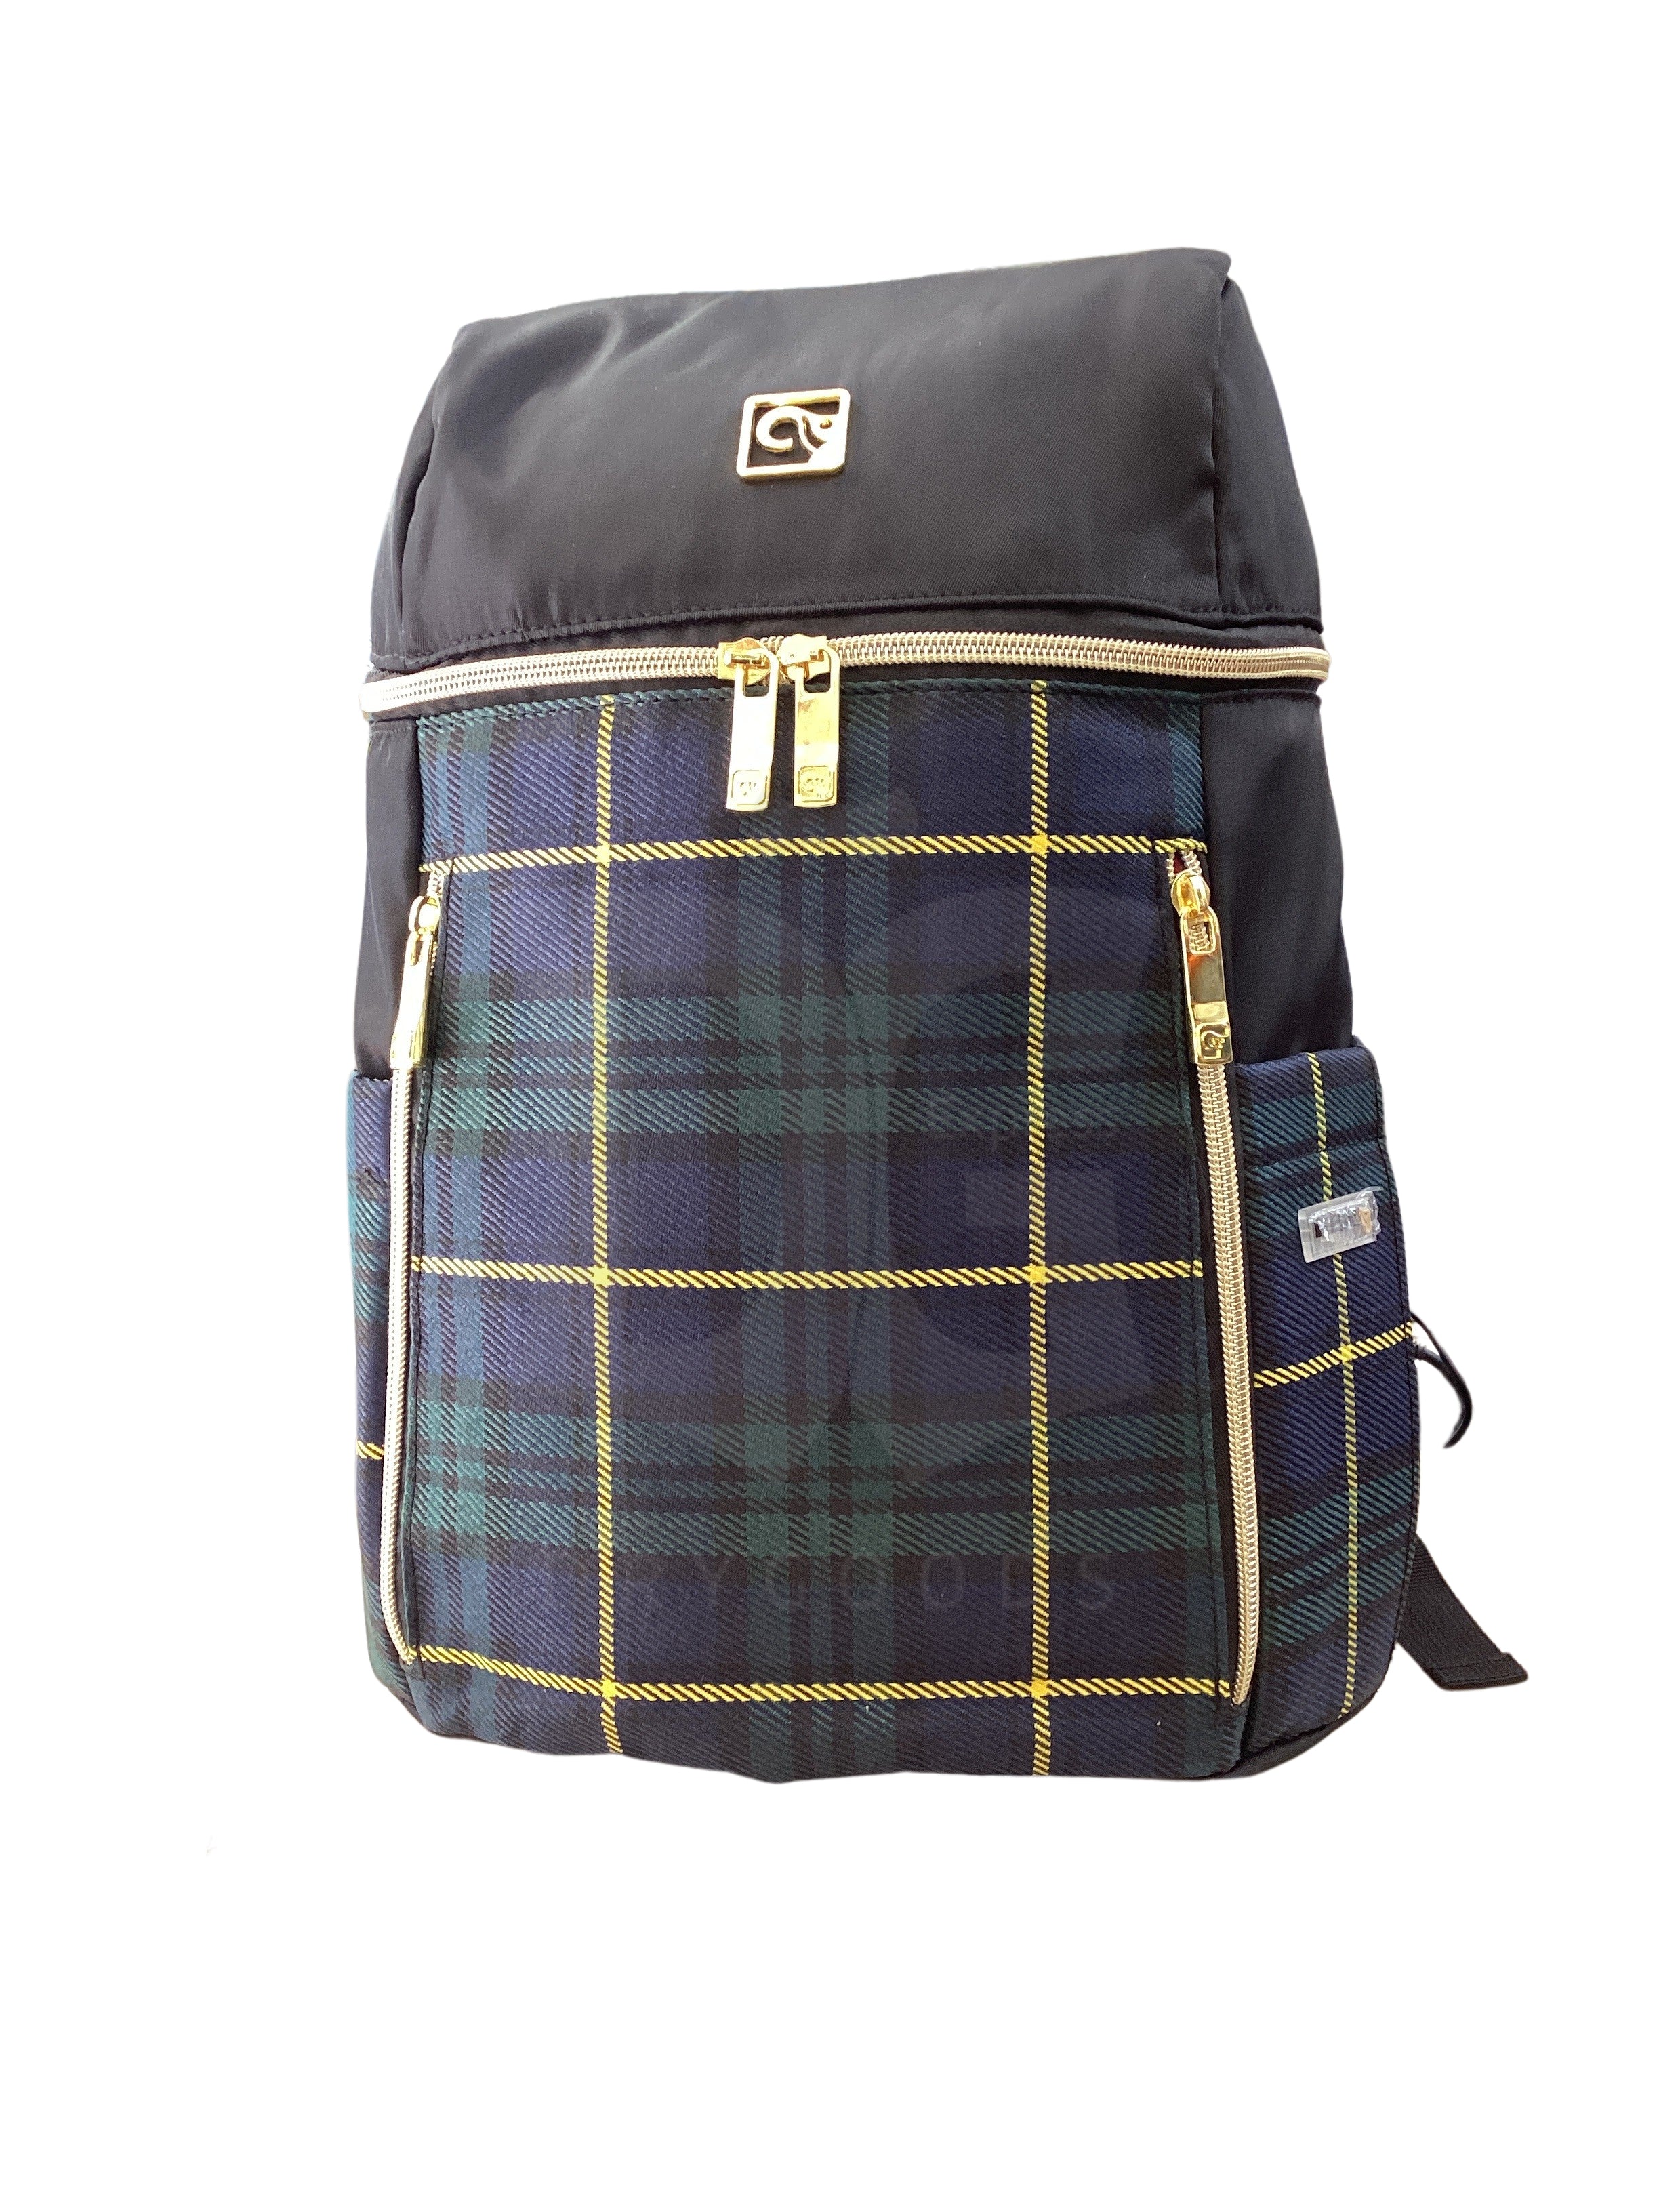 Elesac Briefcase Green Yellow Navy Plaid Backpack